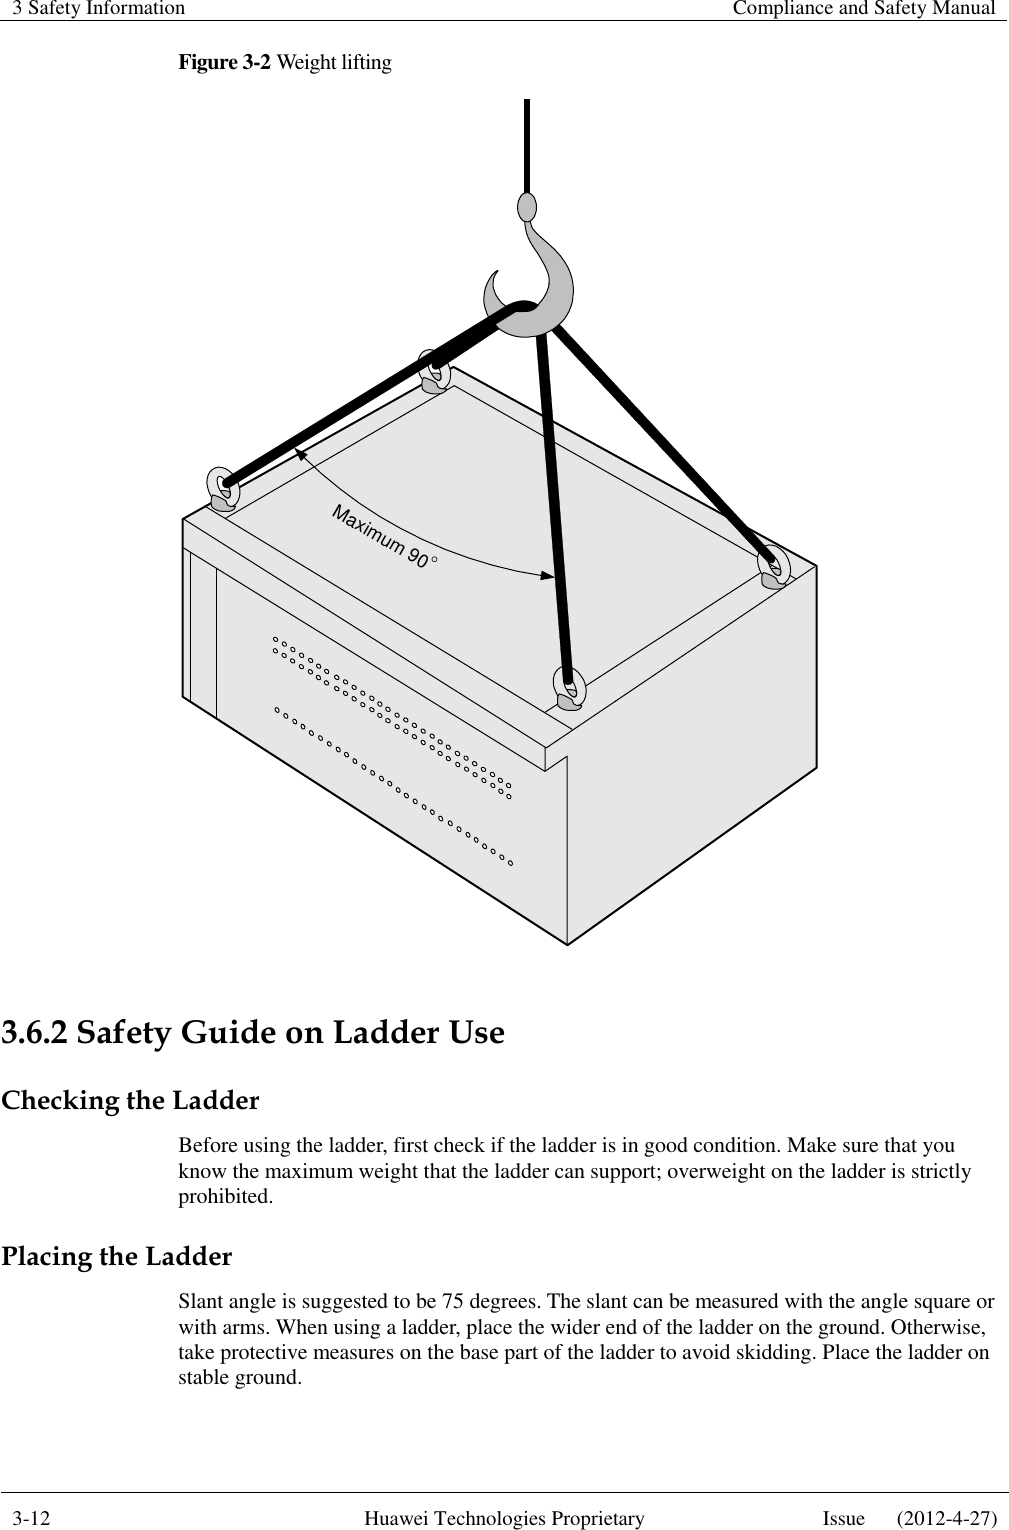 3 Safety Information    Compliance and Safety Manual  3-12 Huawei Technologies Proprietary Issue      (2012-4-27)  Figure 3-2 Weight lifting Maximum 90  3.6.2 Safety Guide on Ladder Use Checking the Ladder Before using the ladder, first check if the ladder is in good condition. Make sure that you know the maximum weight that the ladder can support; overweight on the ladder is strictly prohibited. Placing the Ladder Slant angle is suggested to be 75 degrees. The slant can be measured with the angle square or with arms. When using a ladder, place the wider end of the ladder on the ground. Otherwise, take protective measures on the base part of the ladder to avoid skidding. Place the ladder on stable ground. 